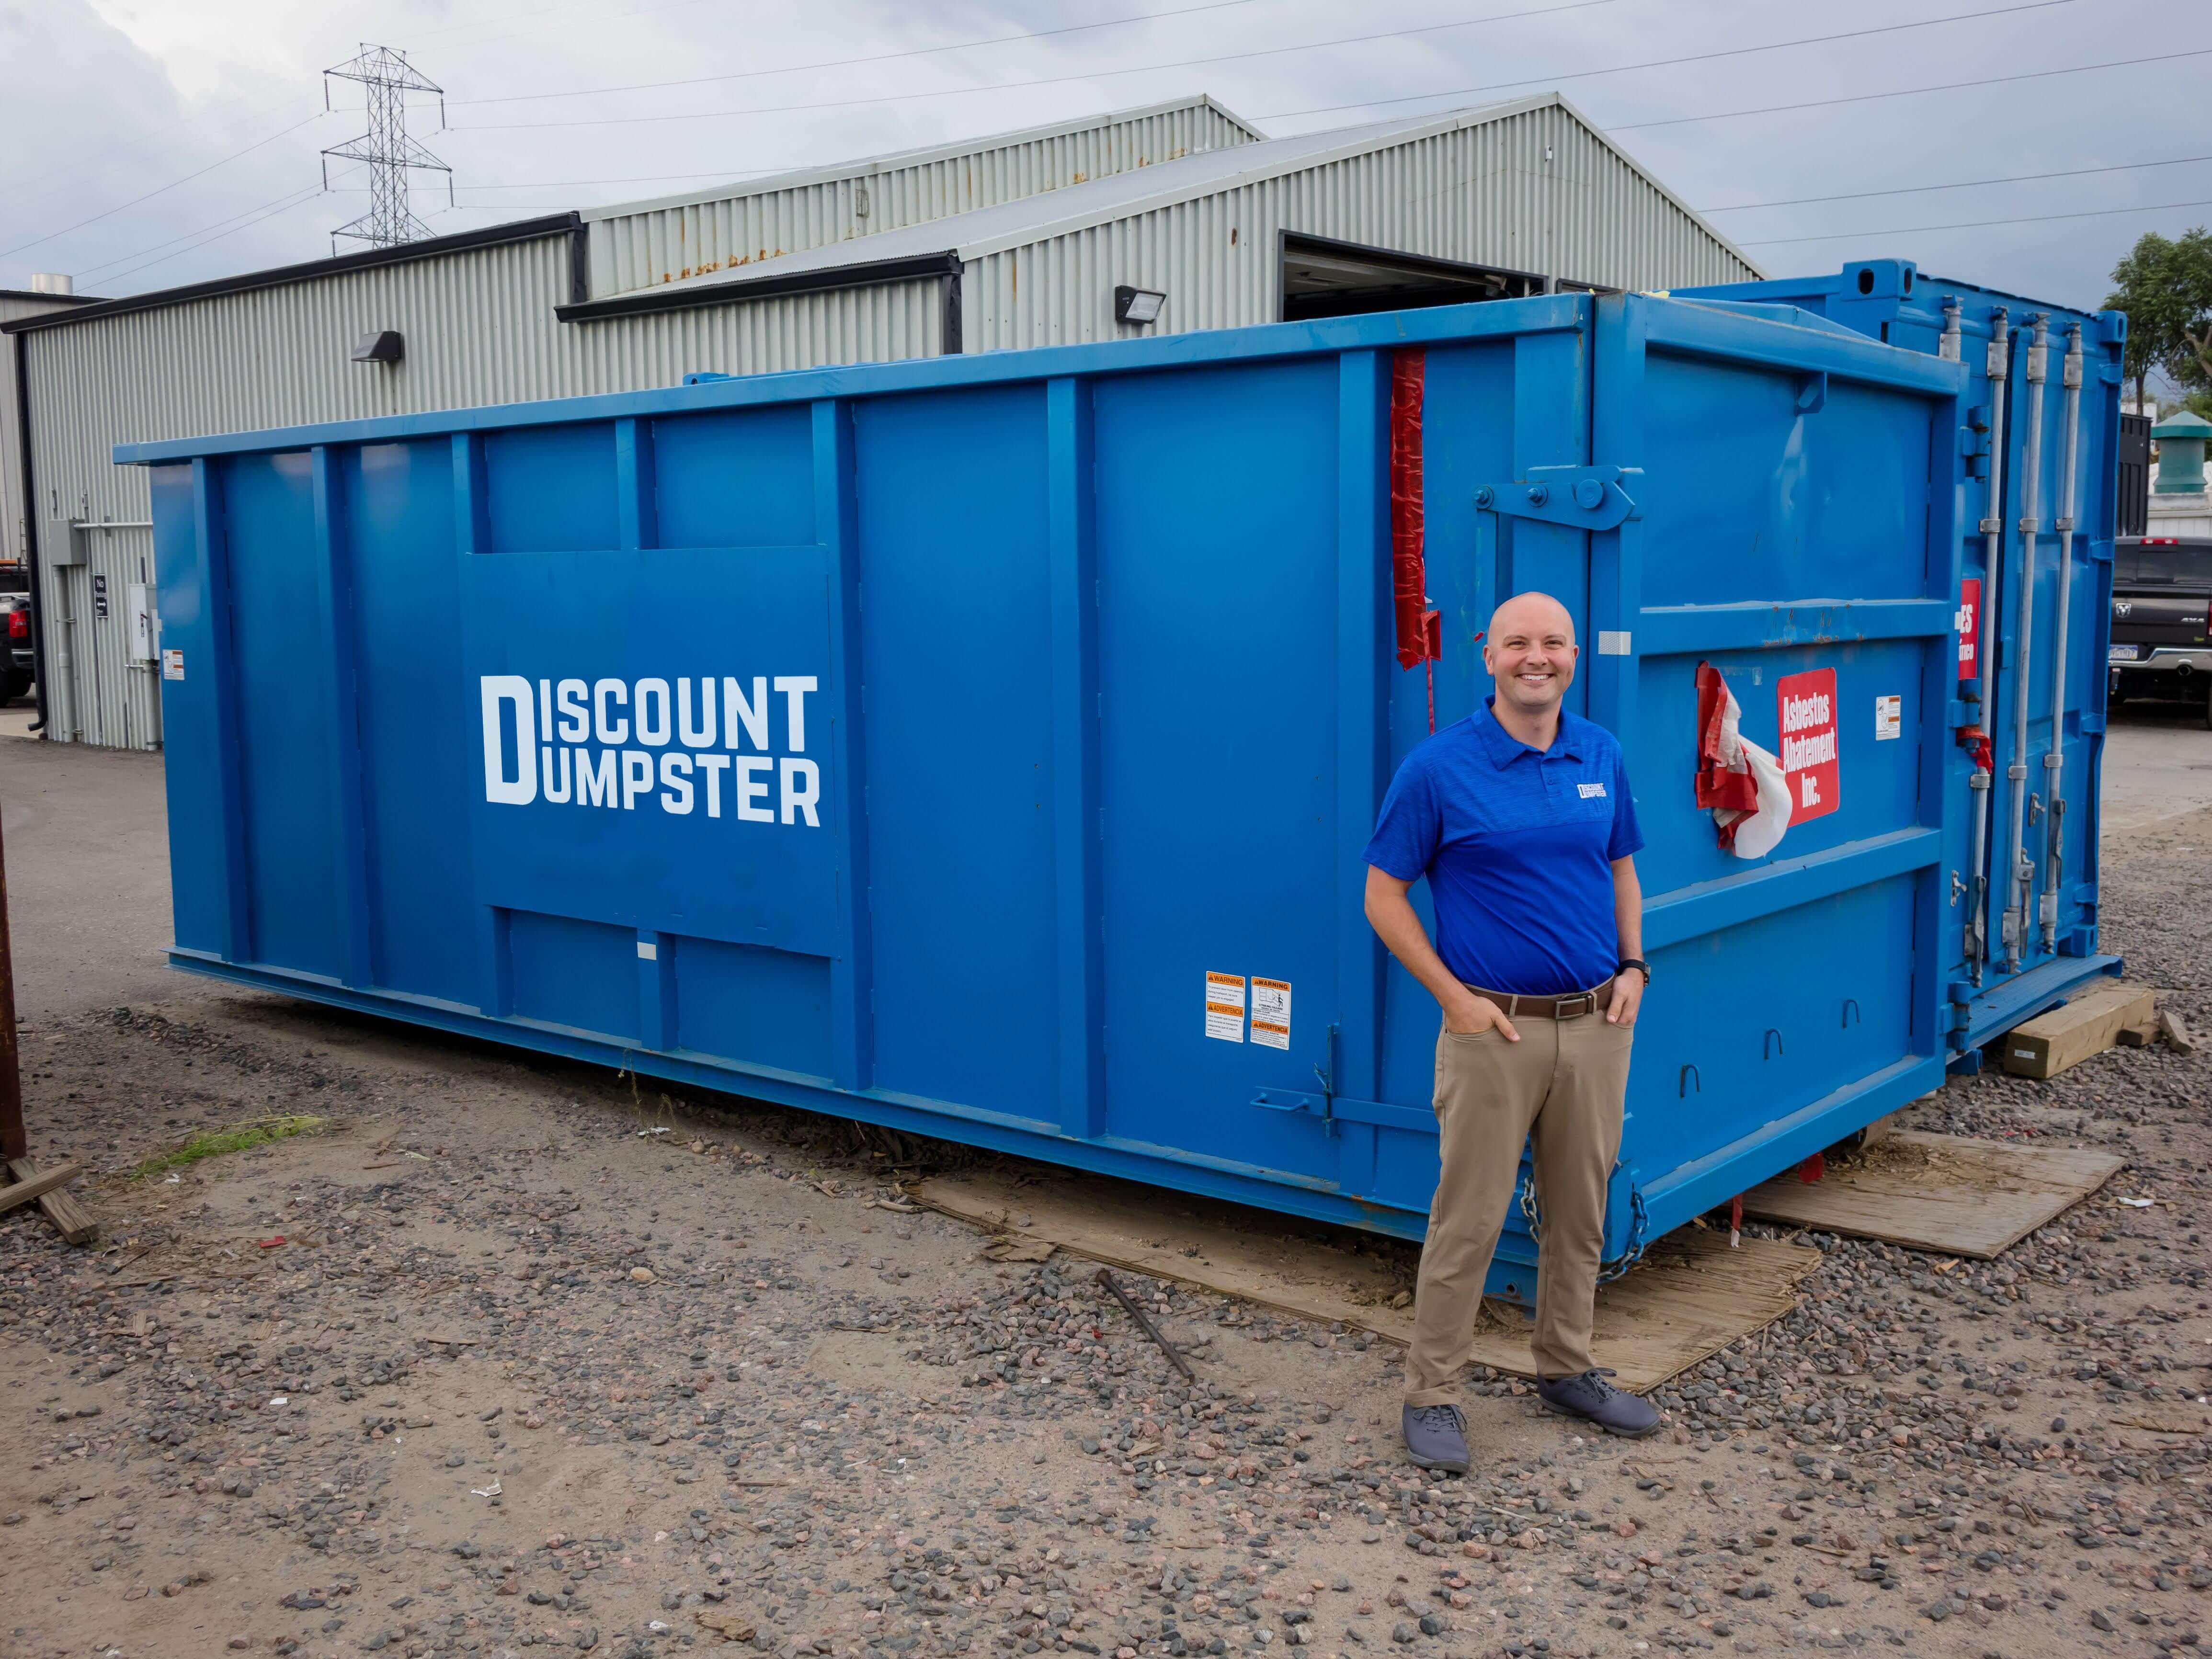 Call now to learn about our dumpster rental rates at discount dumpster in chicago il